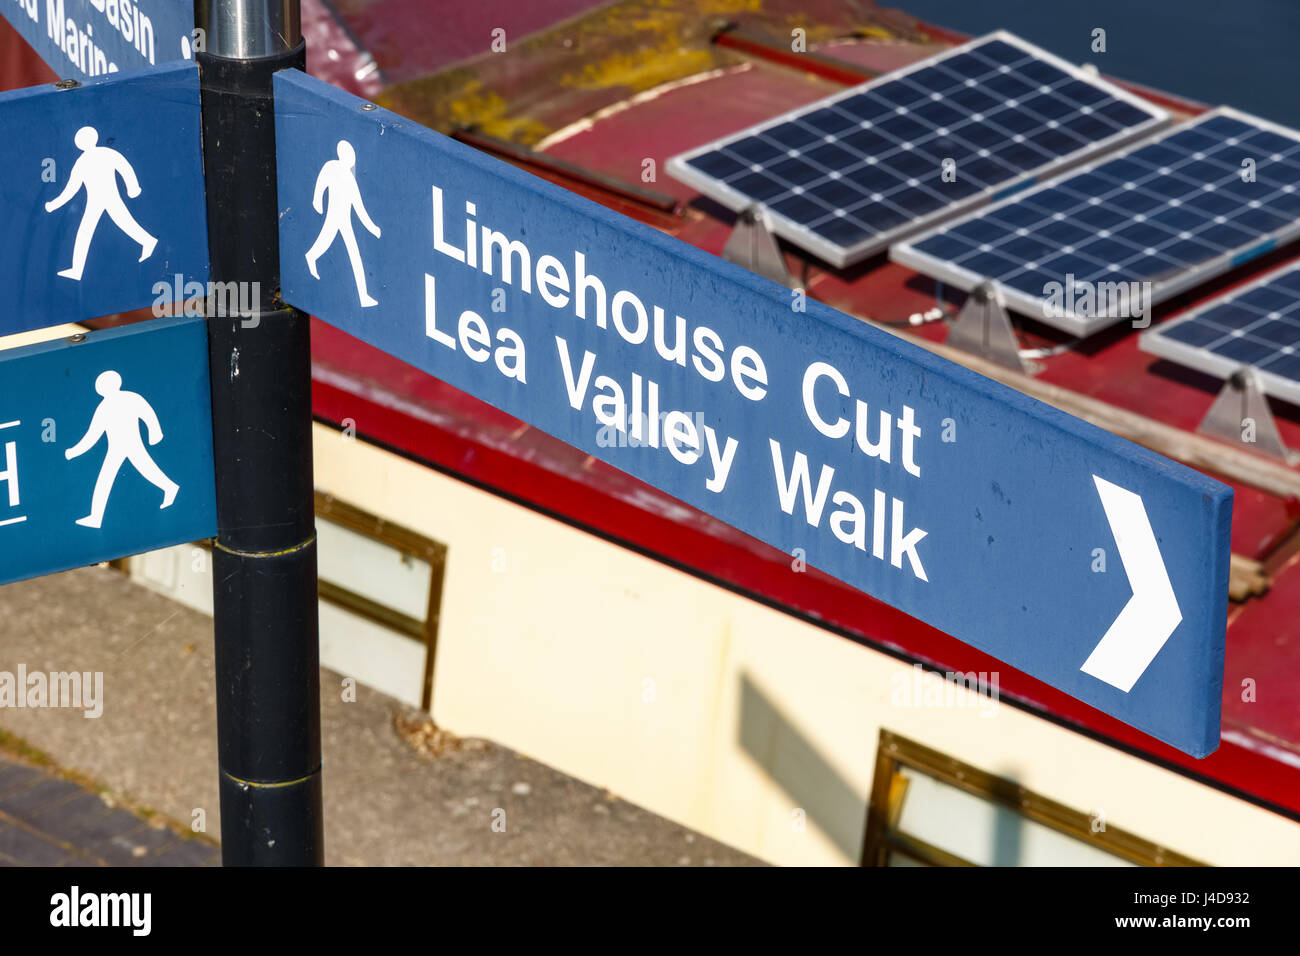 Limehouse Cut and Lea Valley Walk street sign in London with a narrowboat in the backgroun Stock Photo